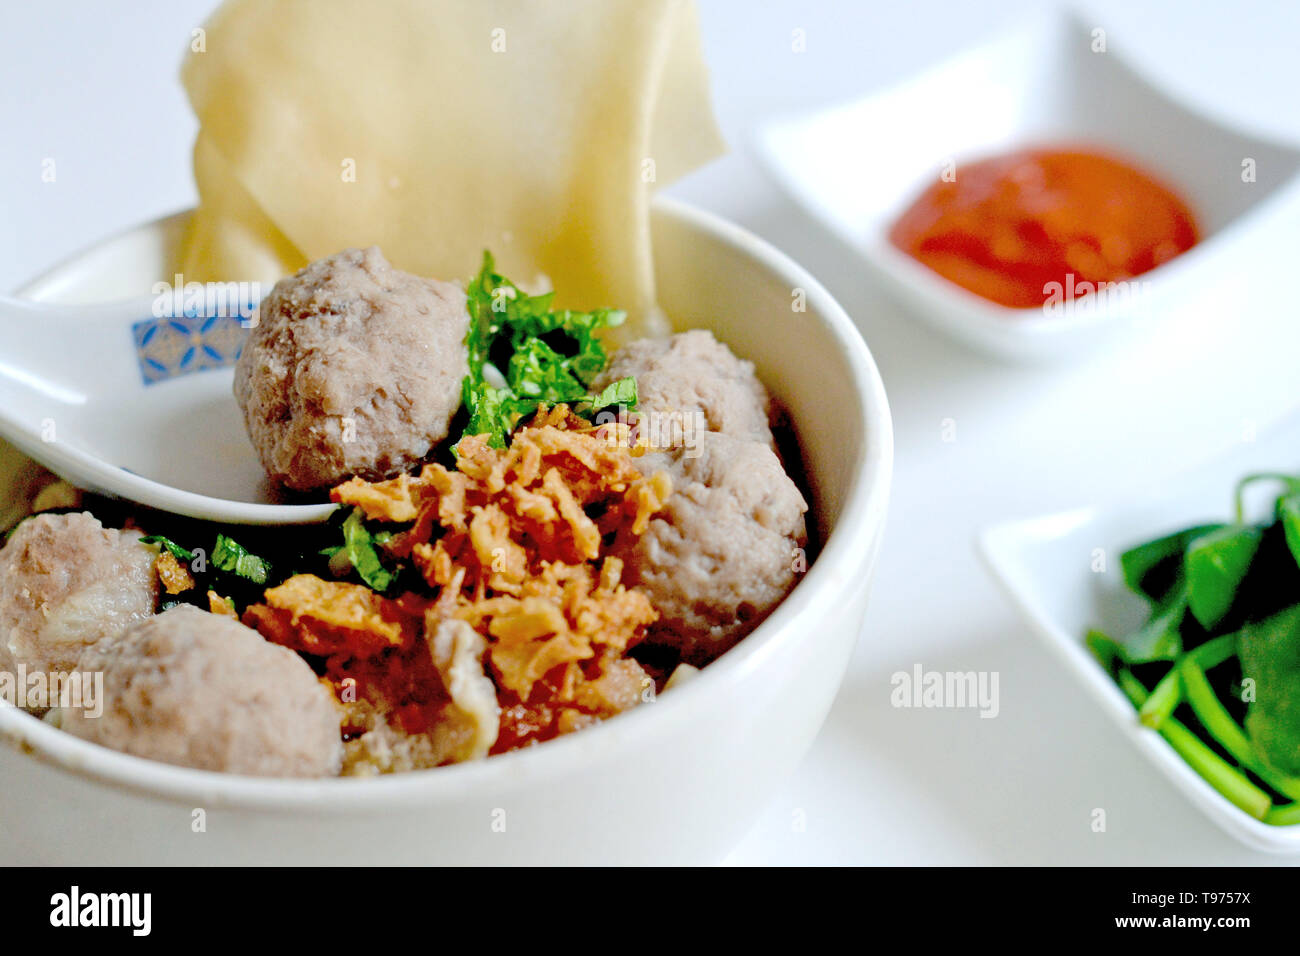 Indonesian Food Meat Ball Soup Beef Ball Baso Bakso Mie Ayam Chicken Noodle Stock Photo